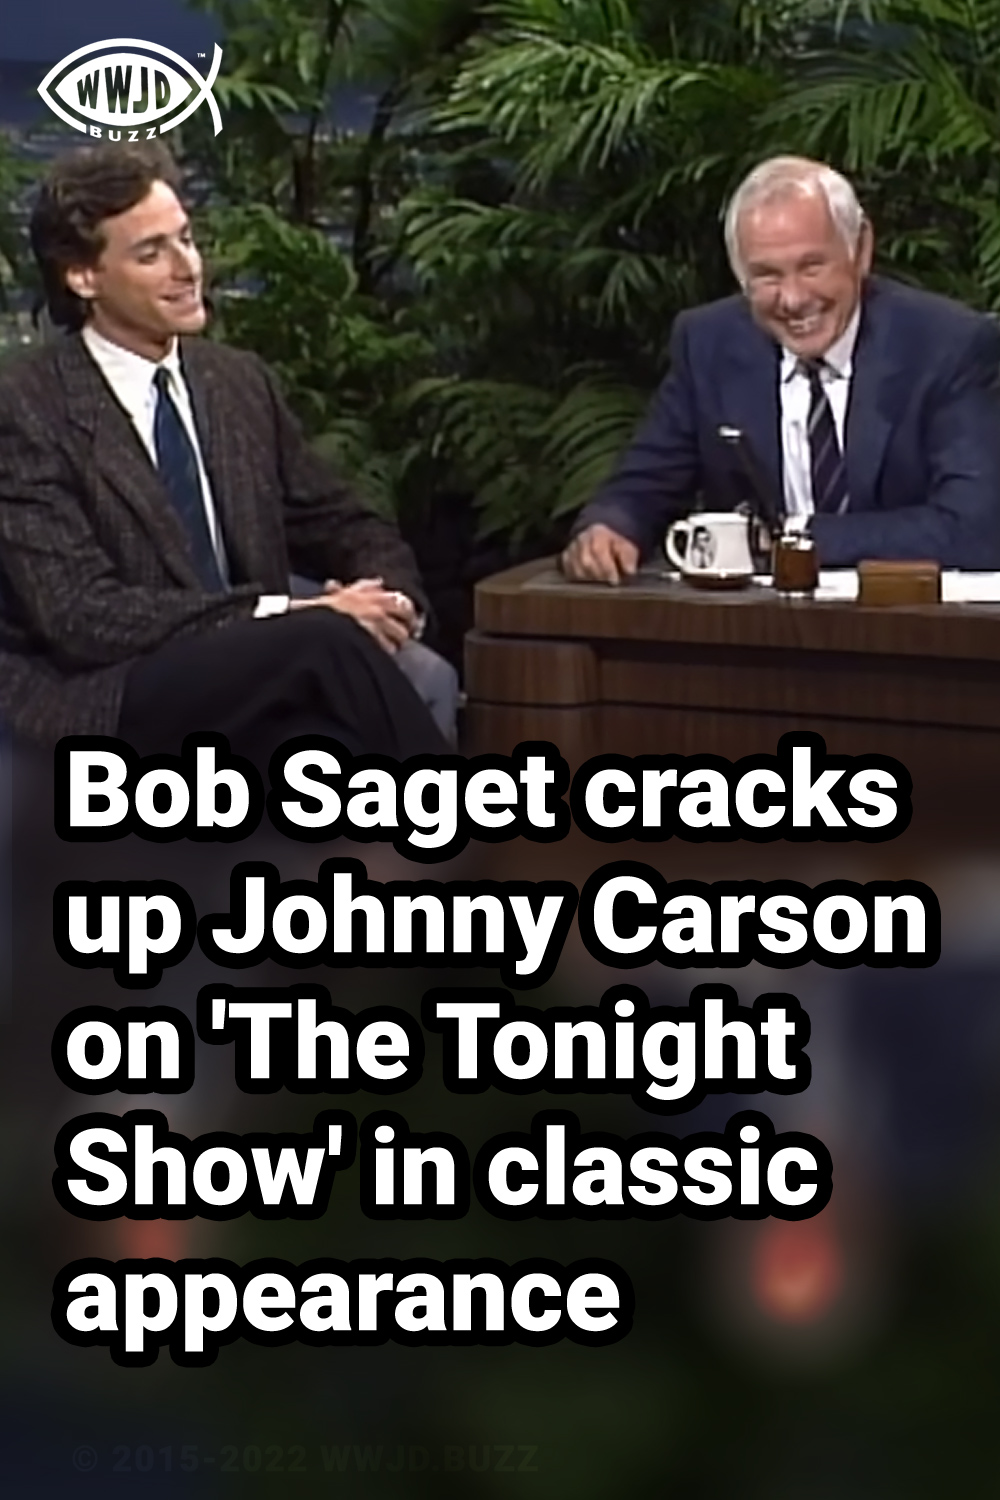 Bob Saget cracks up Johnny Carson on \'The Tonight Show\' in classic appearance